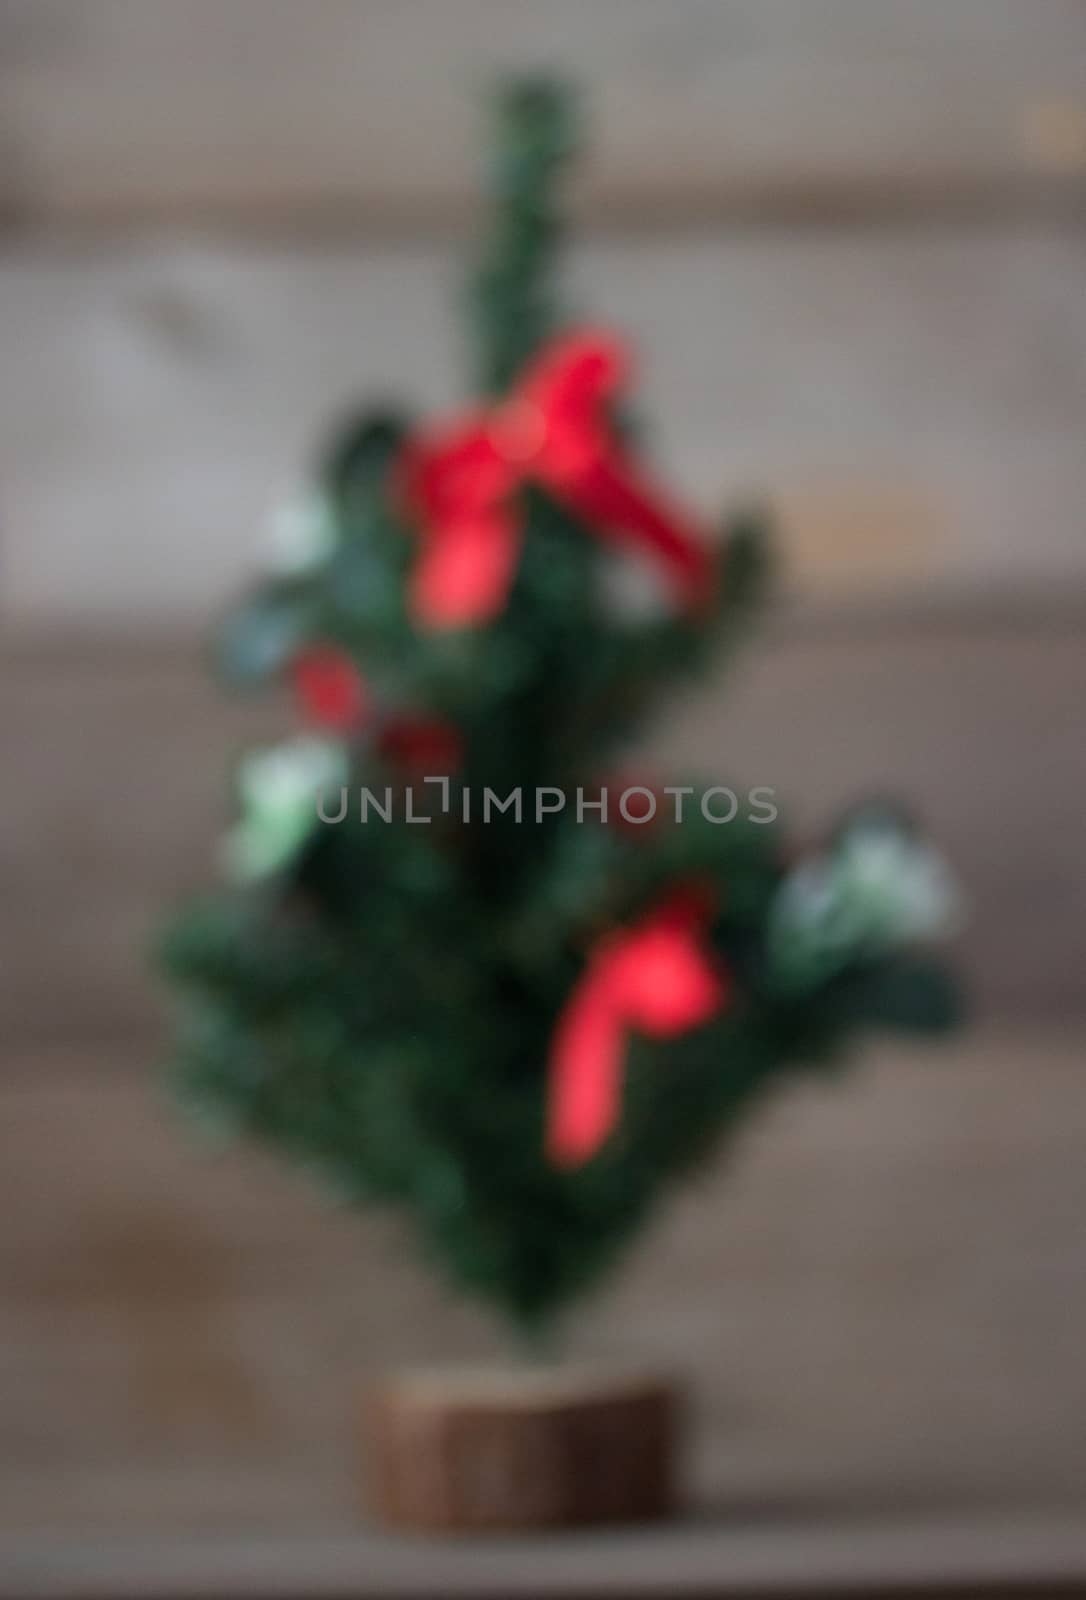 blured Christmas tree with red decorations by liwei12